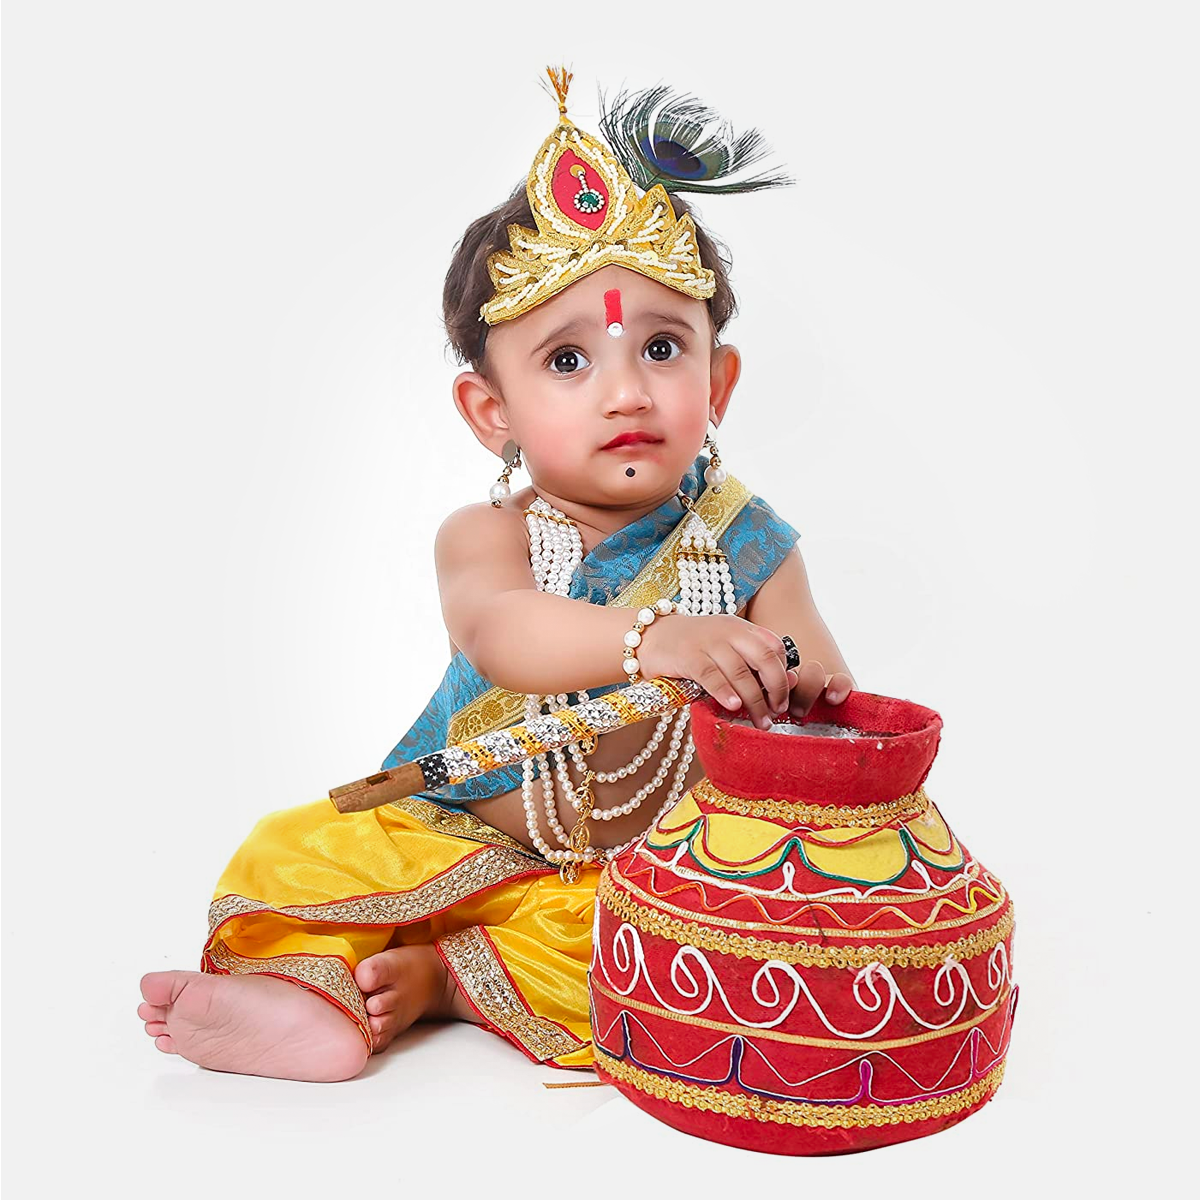 Buy Cotton Bohra Deals Krishna Dress For Kids | Shri Krishna Dress For Baby  Boy | Janmashtami Kanha Constume For Boy And Girl Age 3 Months (9 Month),  Yellow Online at Low